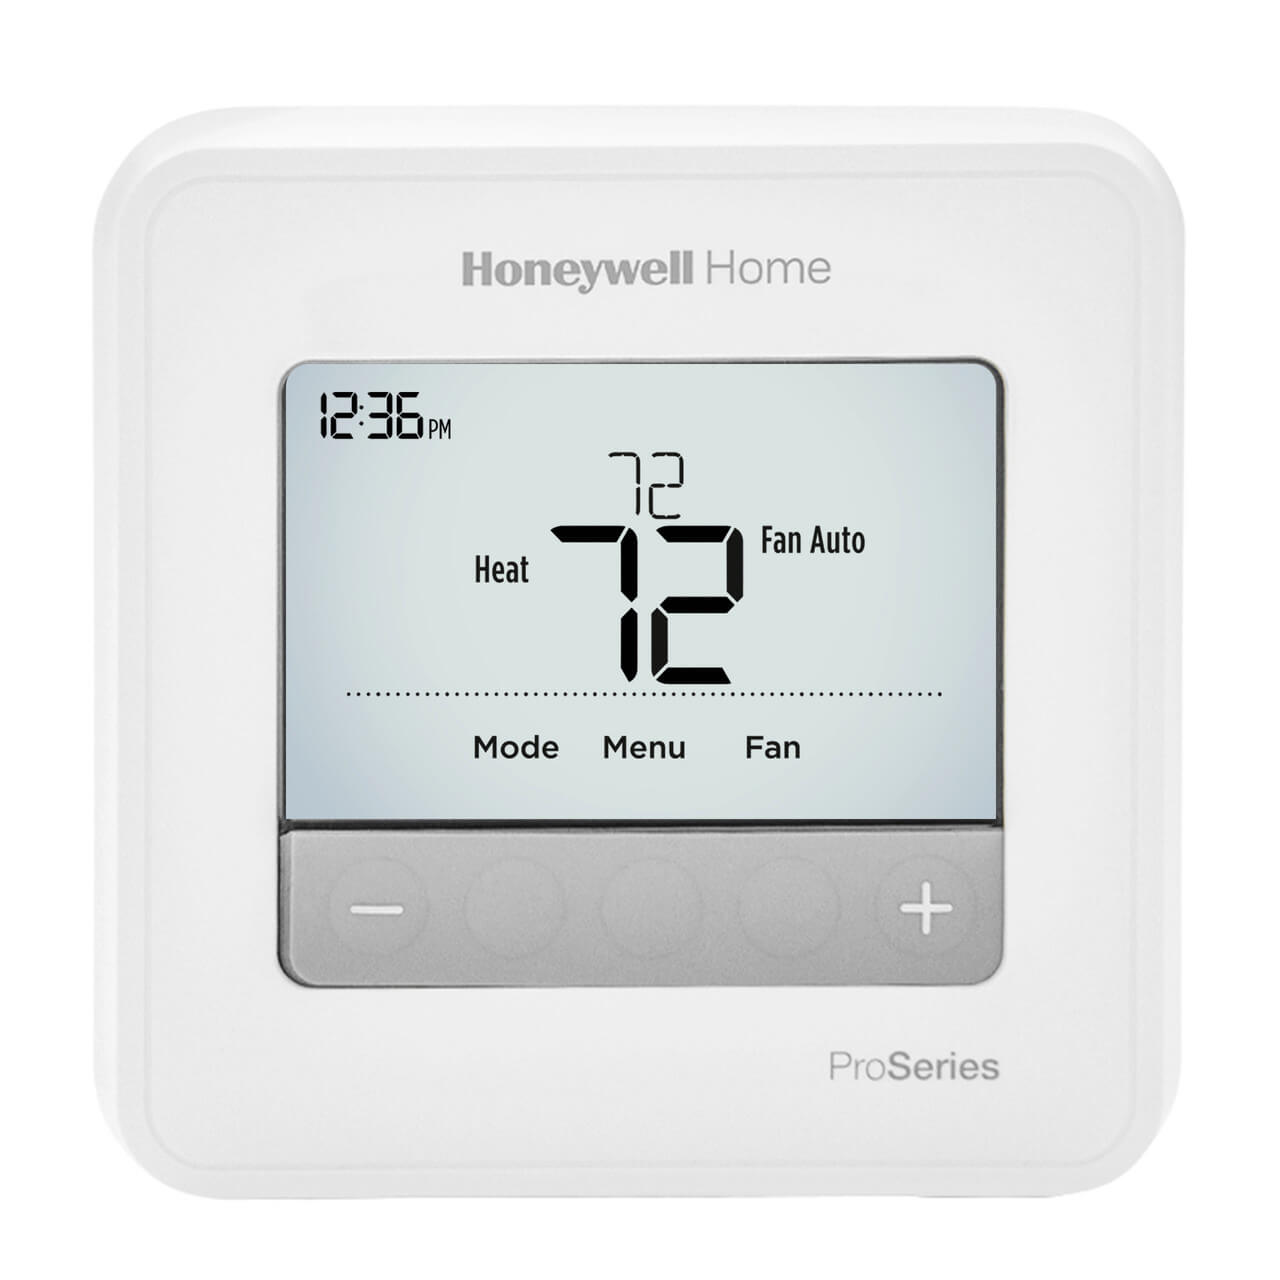 2-Pack Honeywell T4 Pro Series Programmable Thermostat TH4110U2005 + LCD Cleaner Bundle